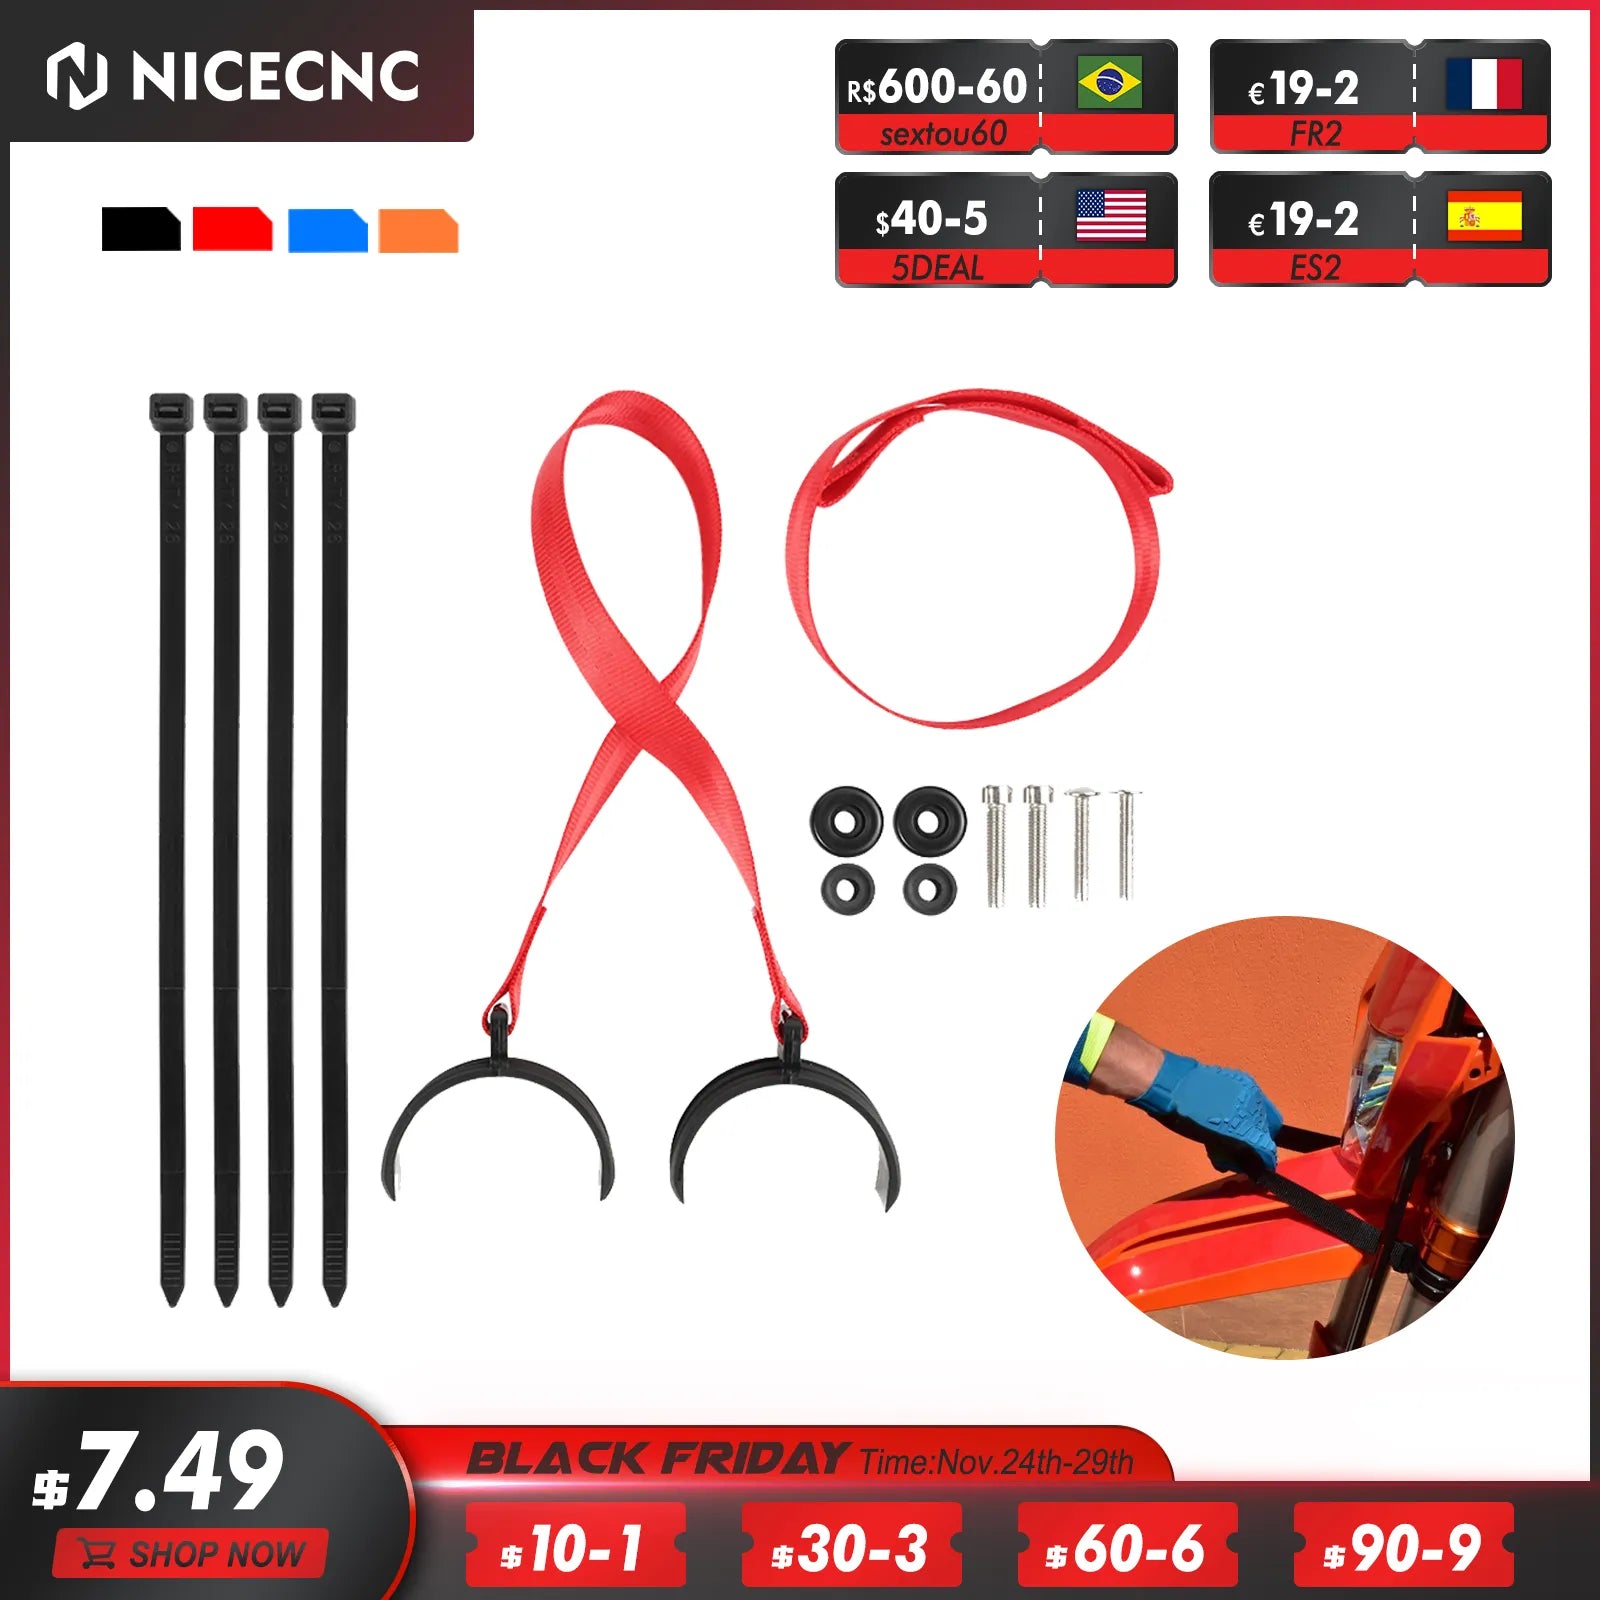 NICECNC Universal Front Rear Holding Strap For BETA ENDURO 10-19 RR 4T 350 390 430 480 2T 125 200 250 300 RC RACING Motocross